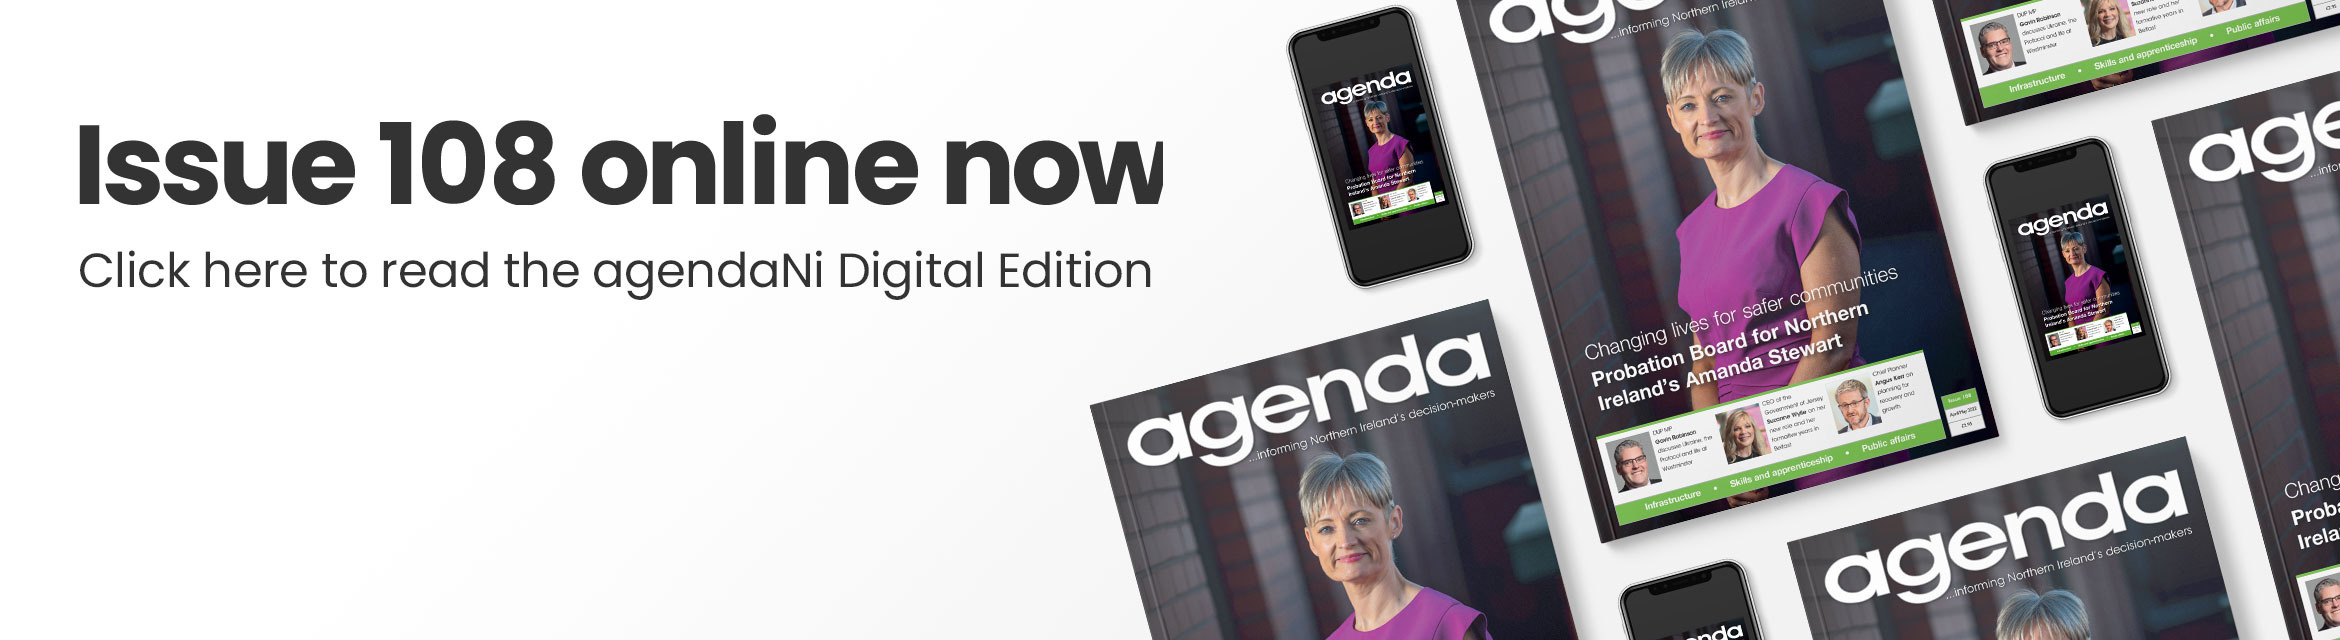 Issue 108 online now. Click here to read the agendaNi Digital Edition.